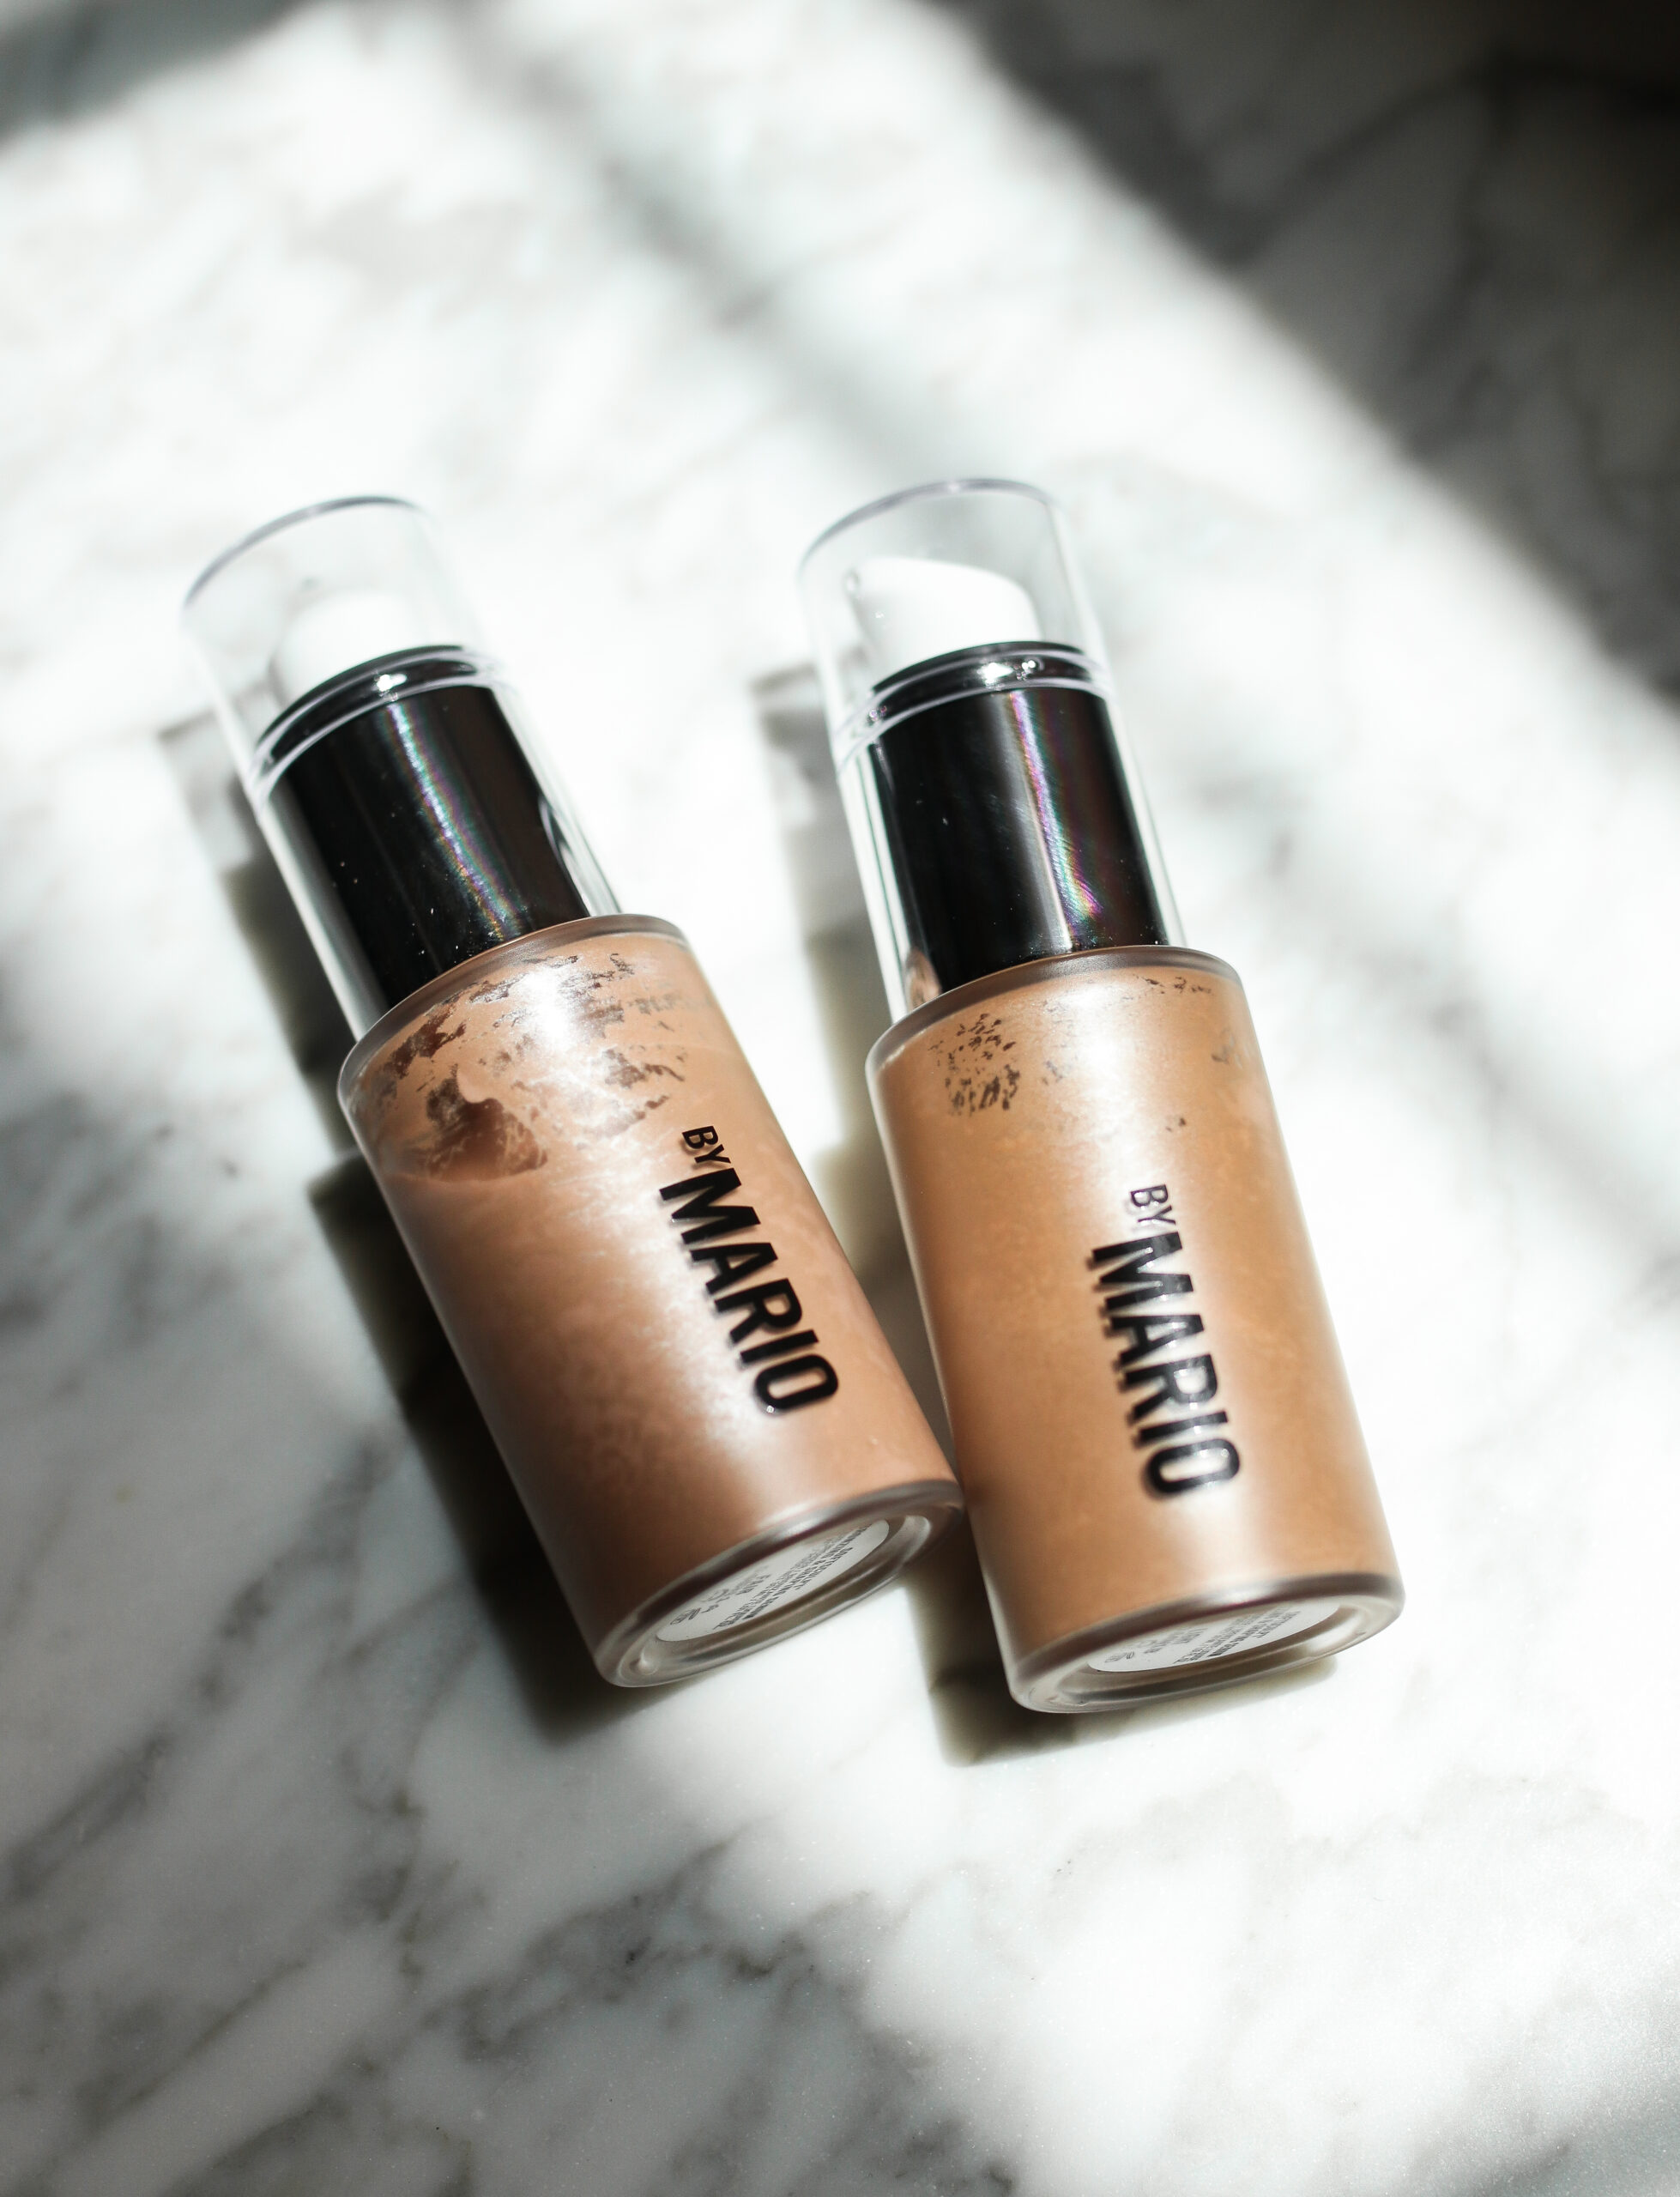 Makeup by Mario Softsculpt Multi-Use Bronzing & Shaping Serum Review